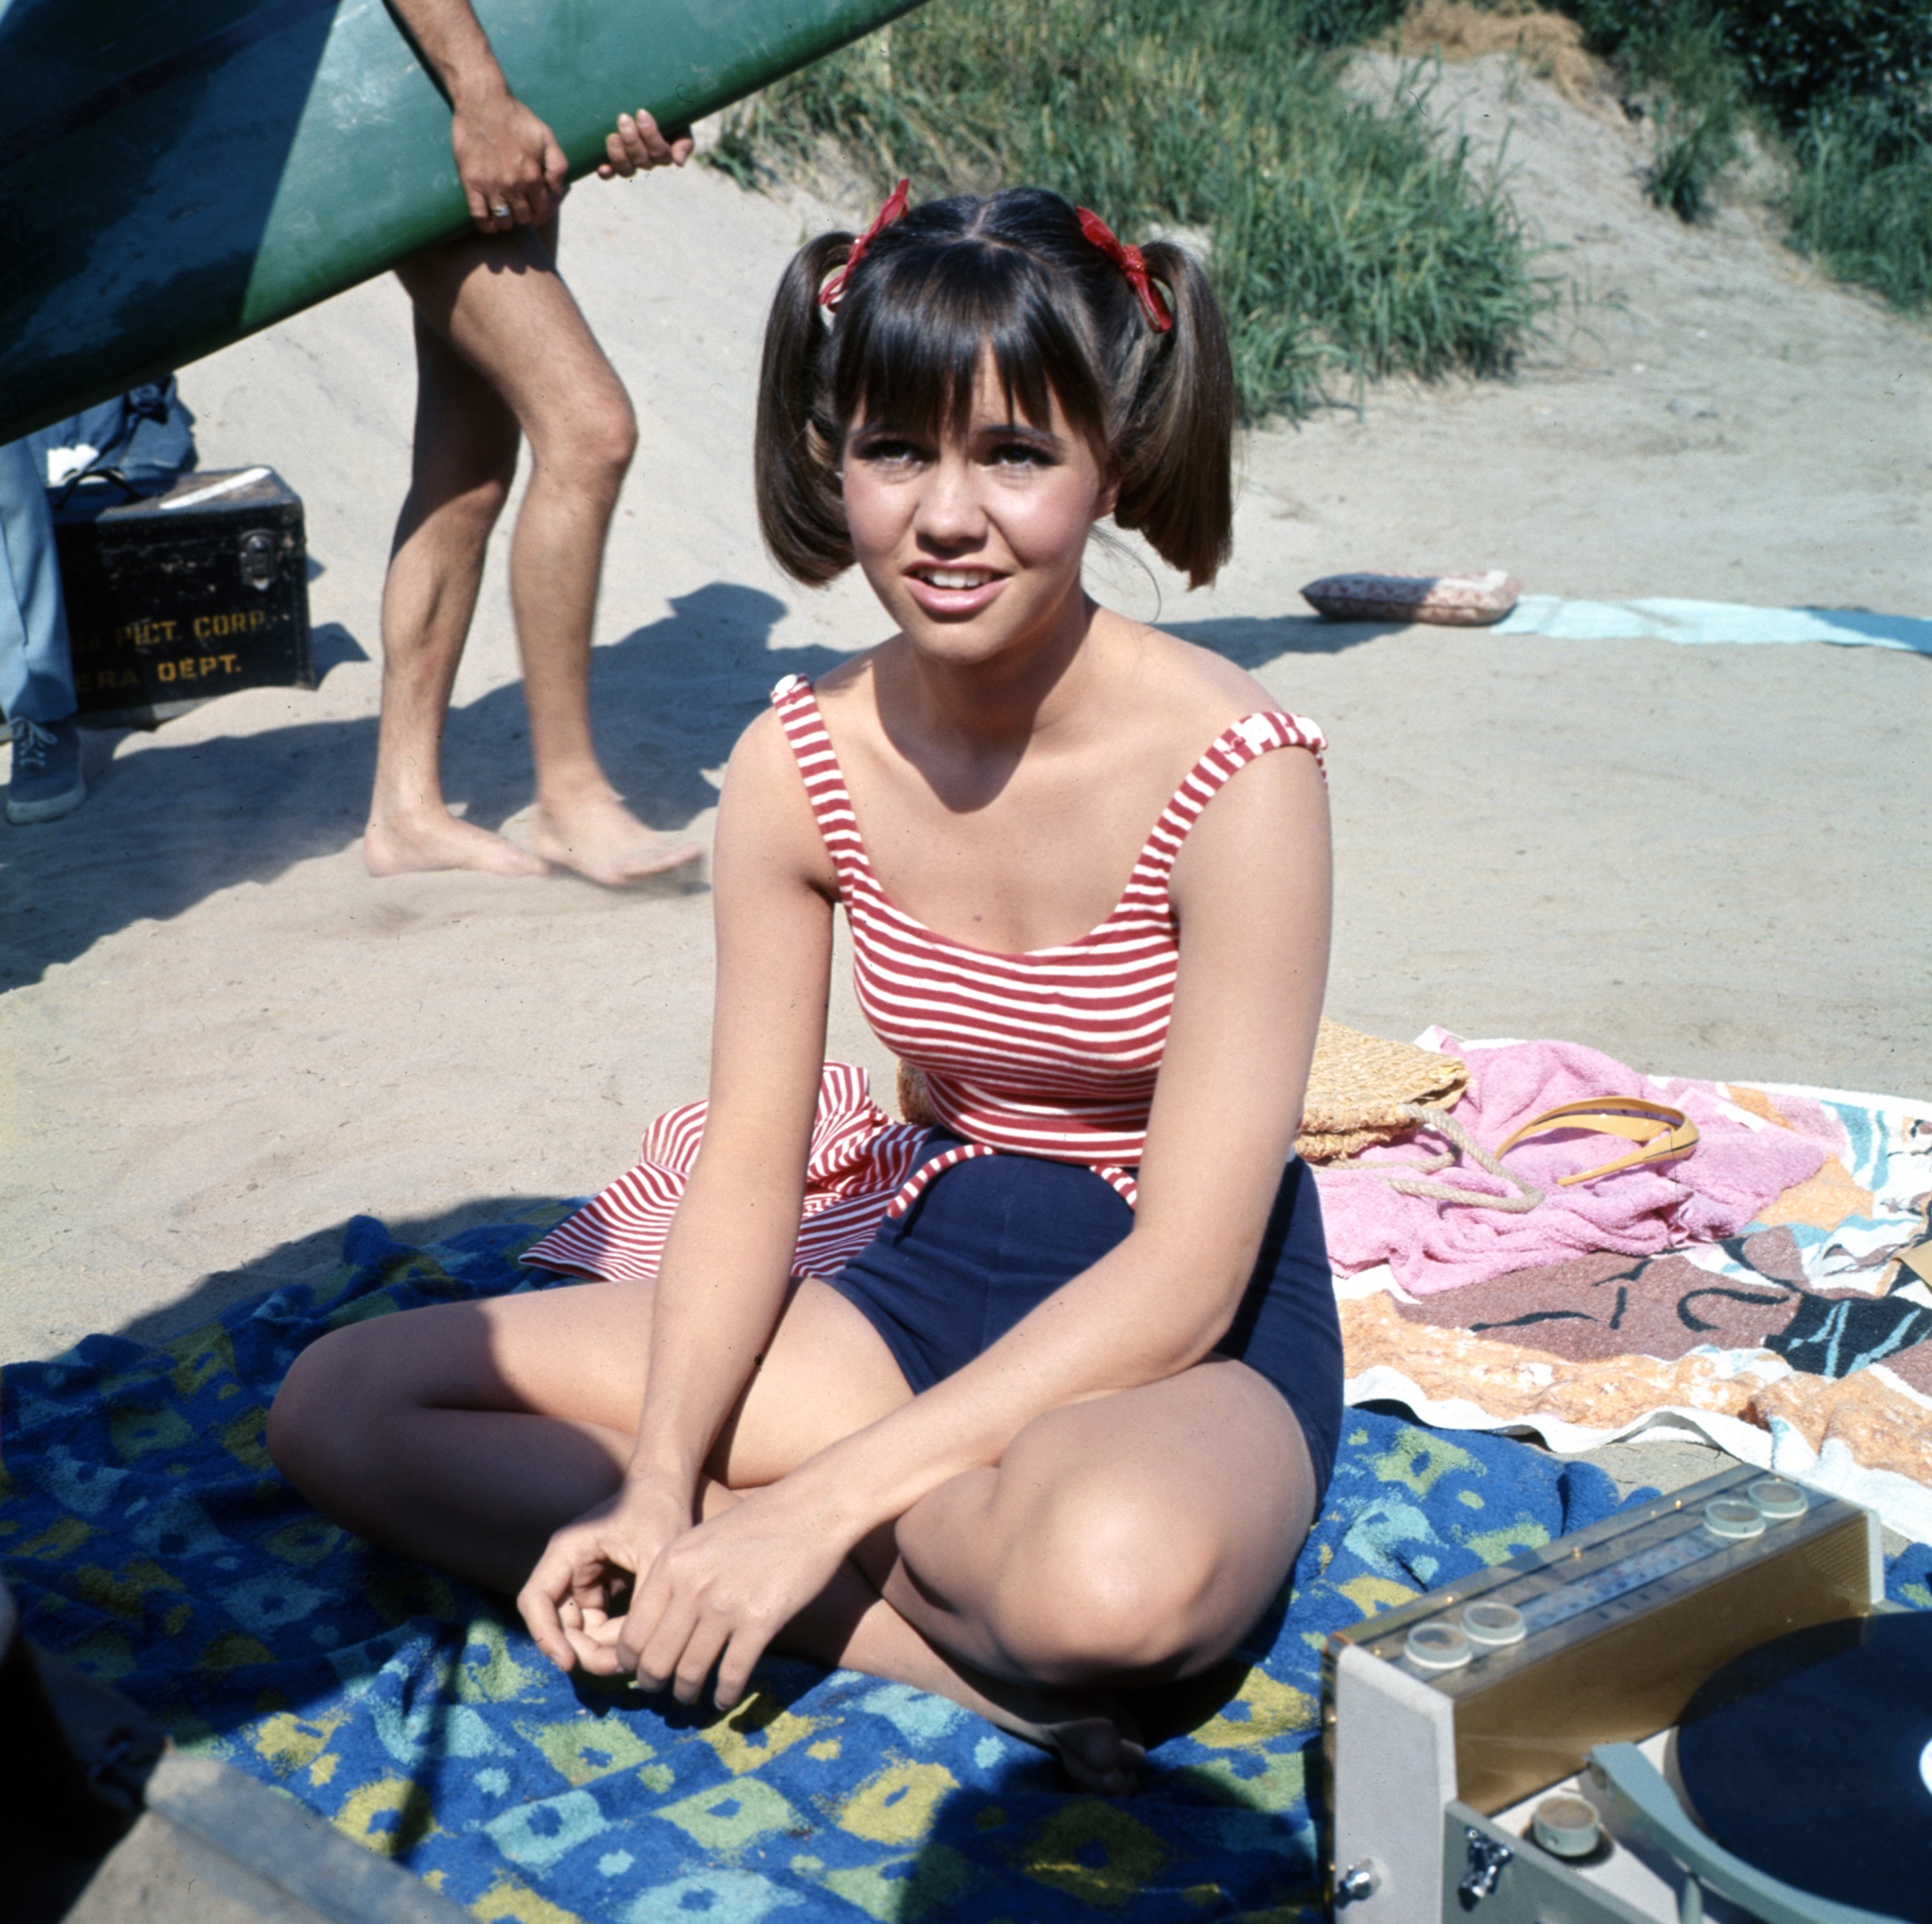 Sally Field playing Gidget during the first season of "Gidget" in 1965 | Source: Getty Images